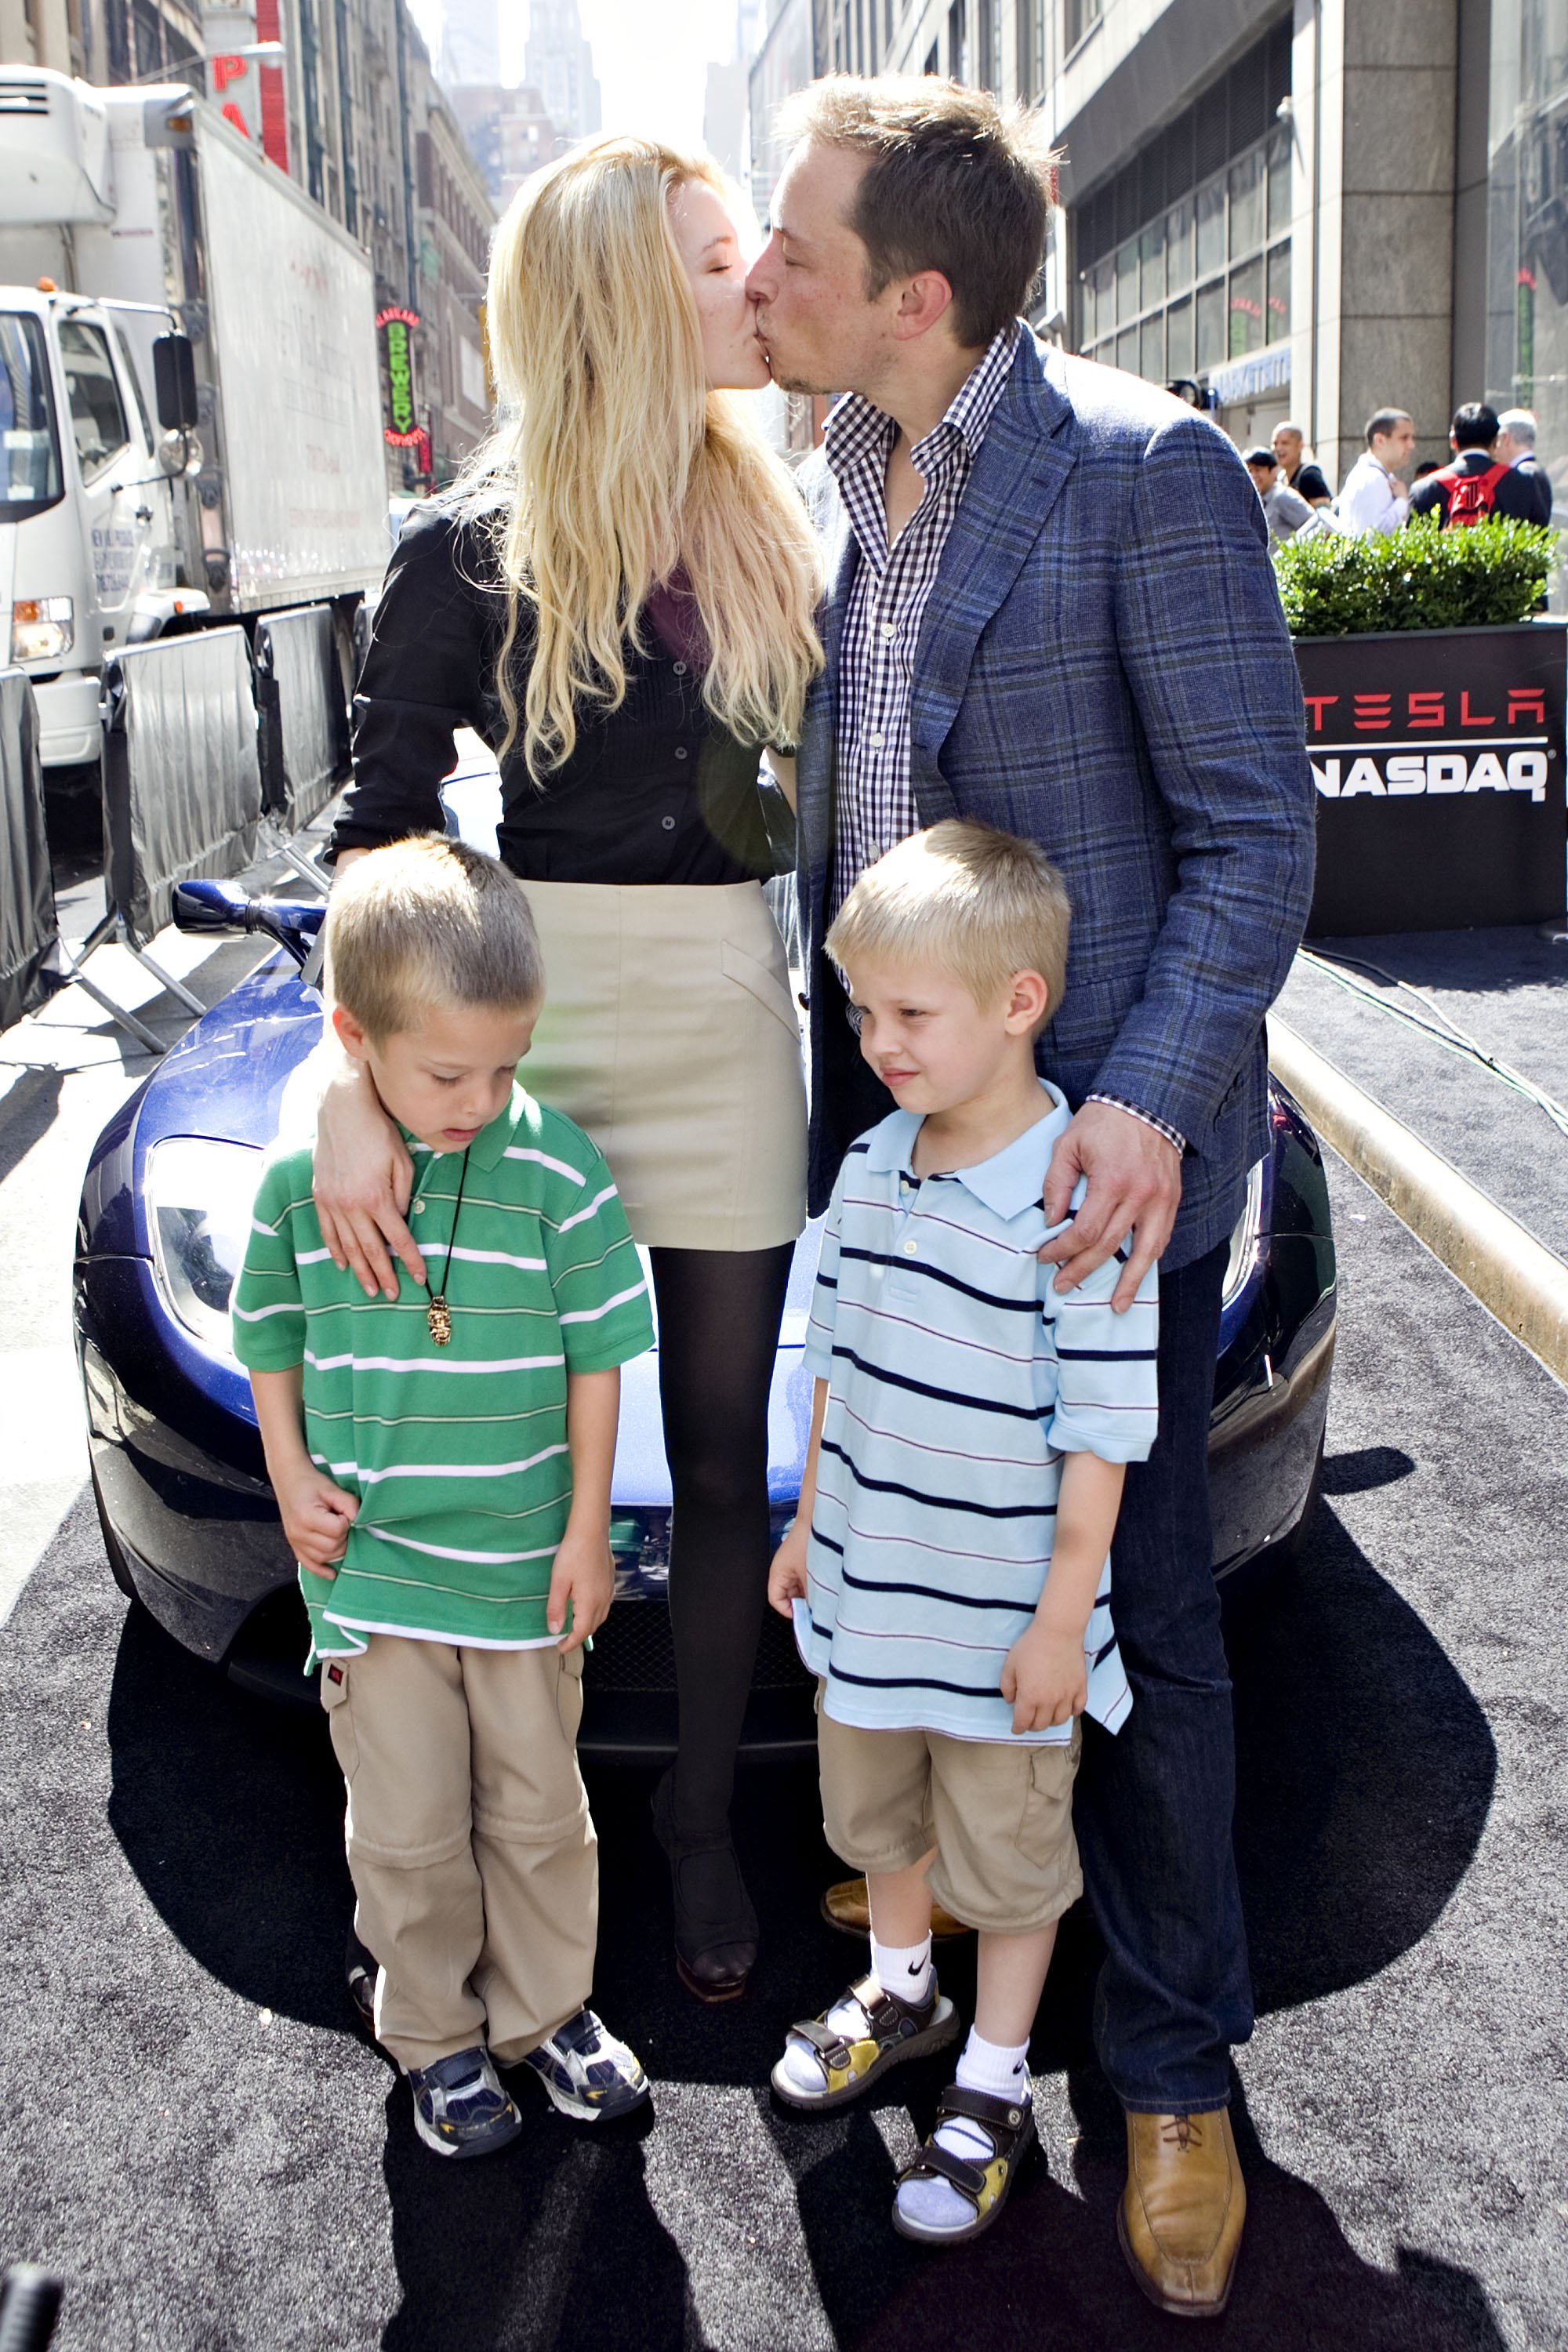 Elon Musk, chairman and chief executive officer of Tesla Motors, kisses his fiancee Talulah Riley as they stand with Musk's twin boys Griffin, left, and Xavier, outside the Nasdaq Marketsite in New York, U.S., on Tuesday, June 29, 2010. | Source: Getty Images